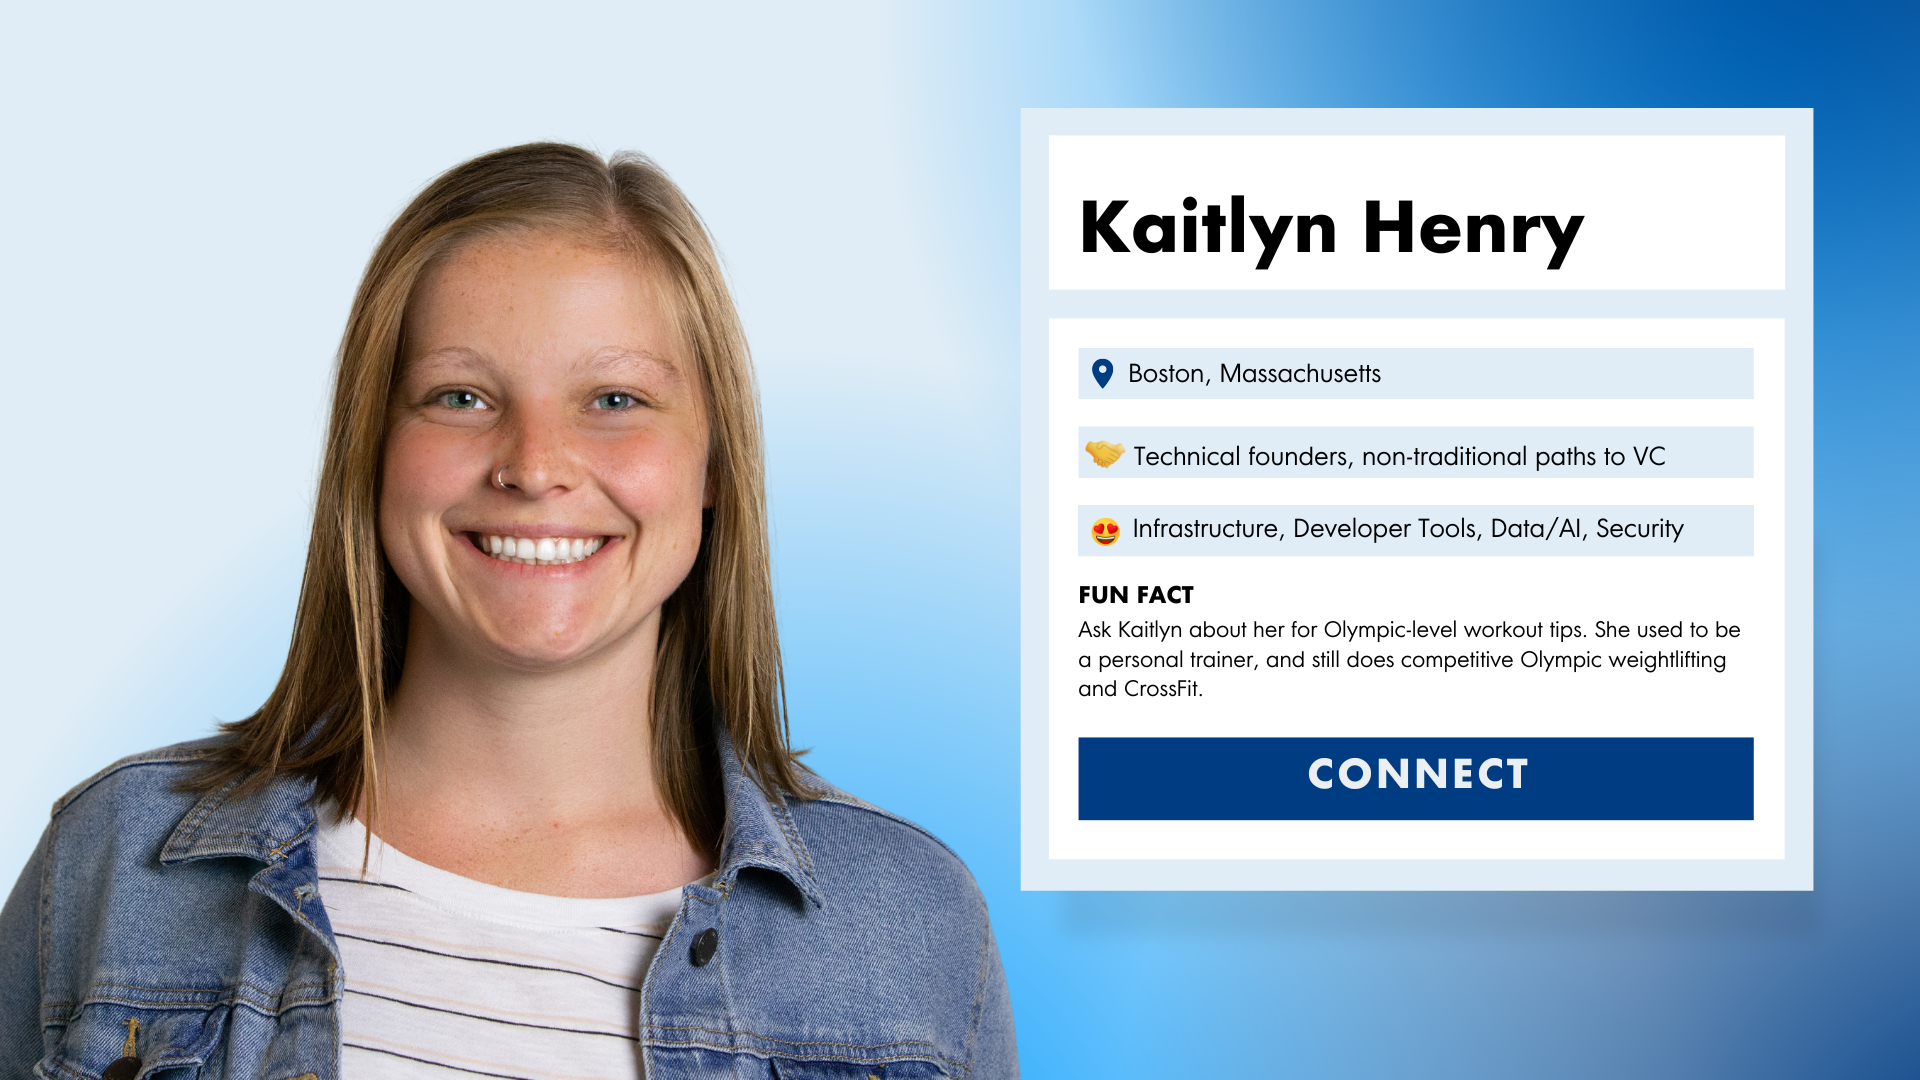 Infographic of Kaitlyn Henry, a new investment VP at OpenView. She is blond, wearing a jean jacket and a white shirt with thin gray stripes. It shows her interests in infrastructure in tech, dev tools, security, and other areas. 